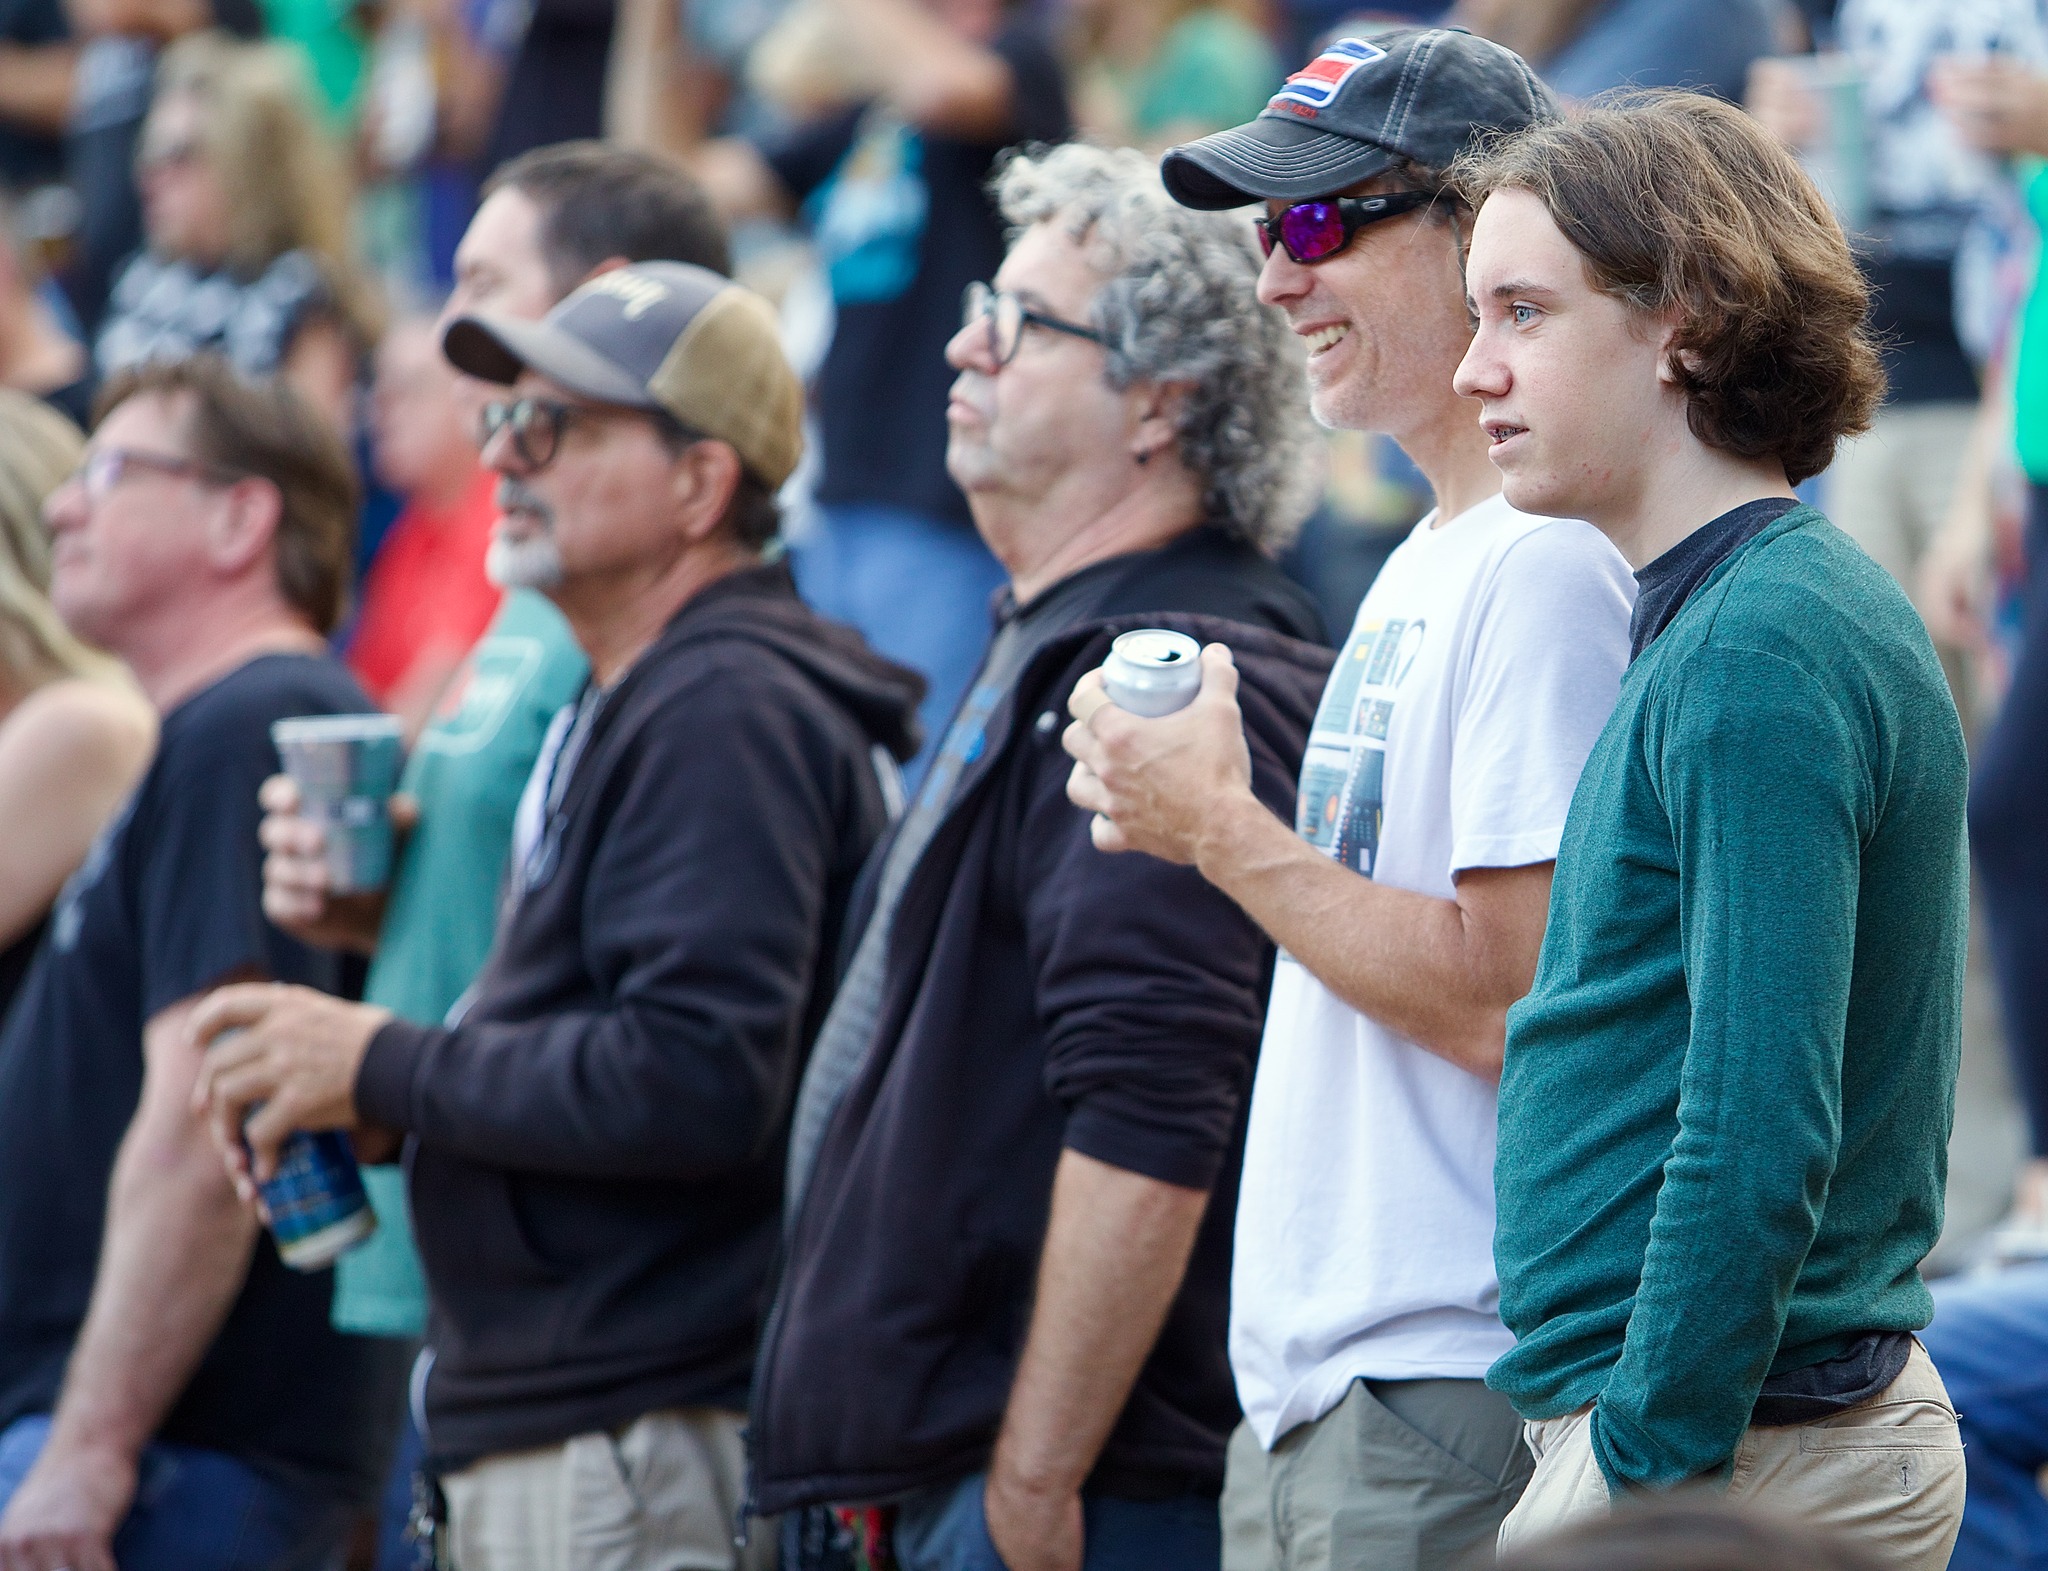 A multi-generational audience at Mule's show